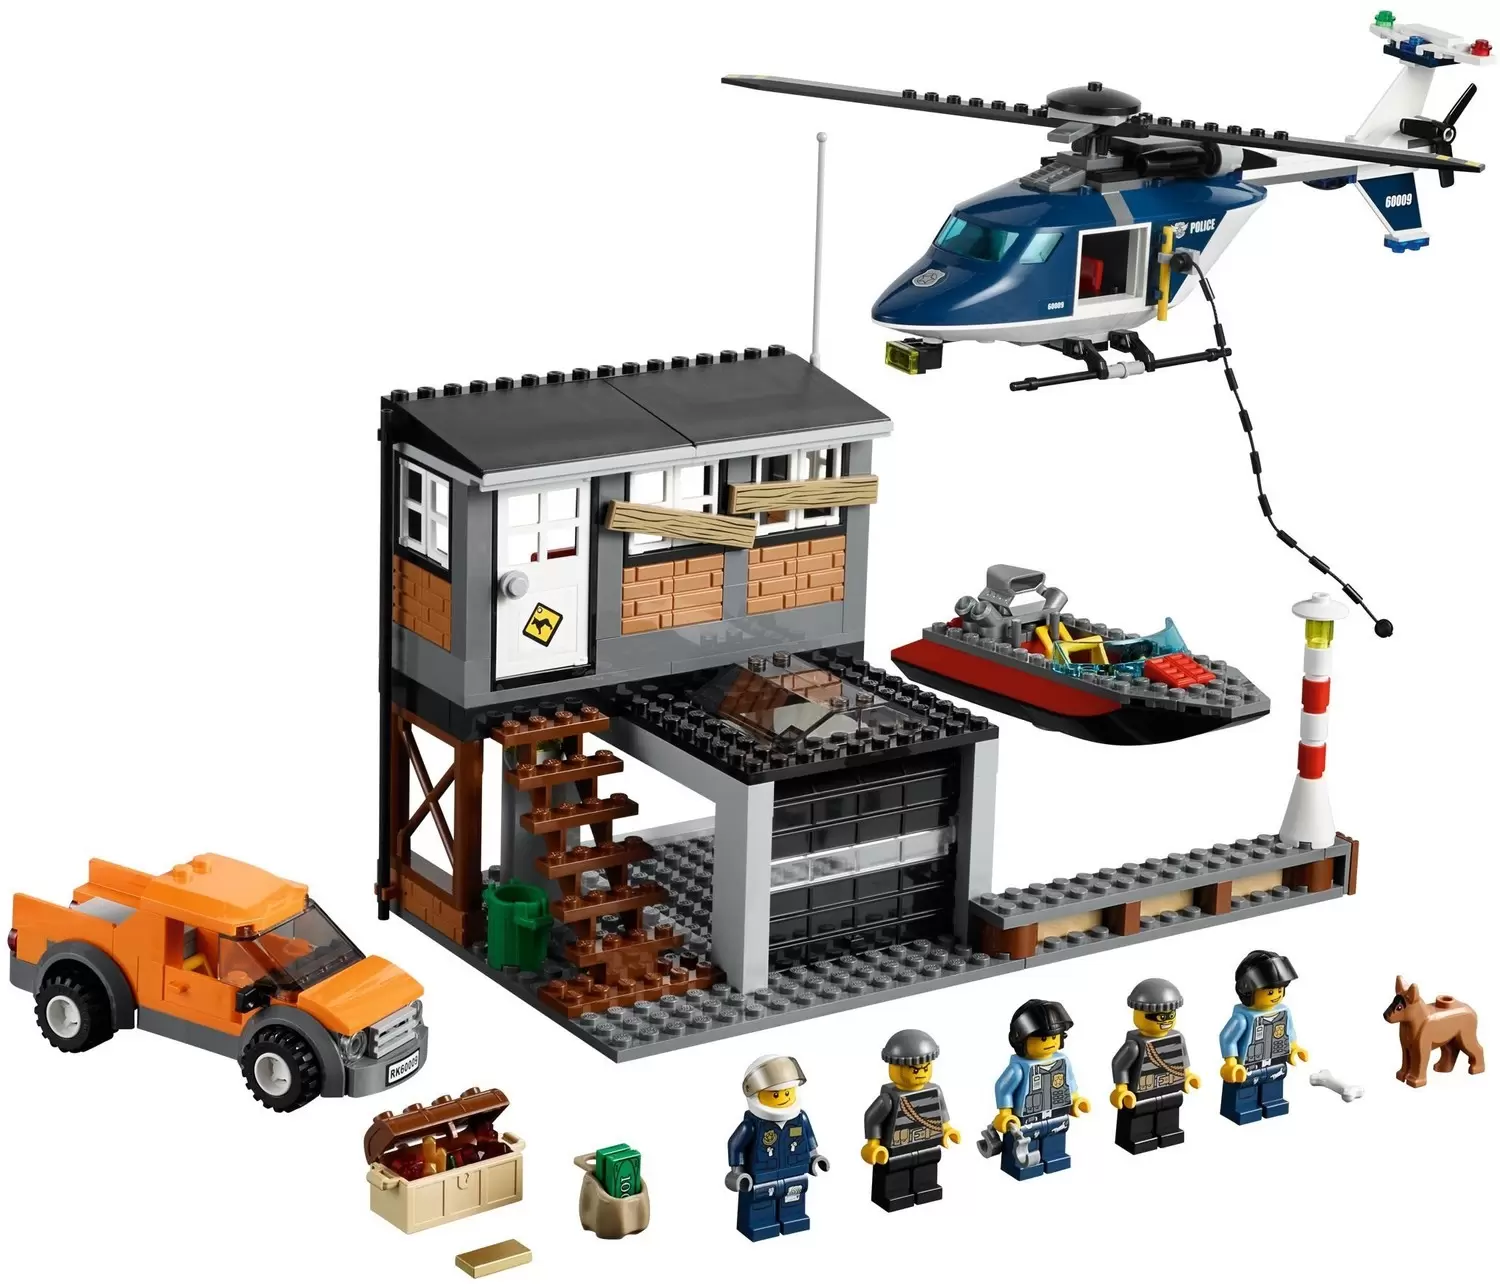 LEGO CITY - Helicopter Arrest